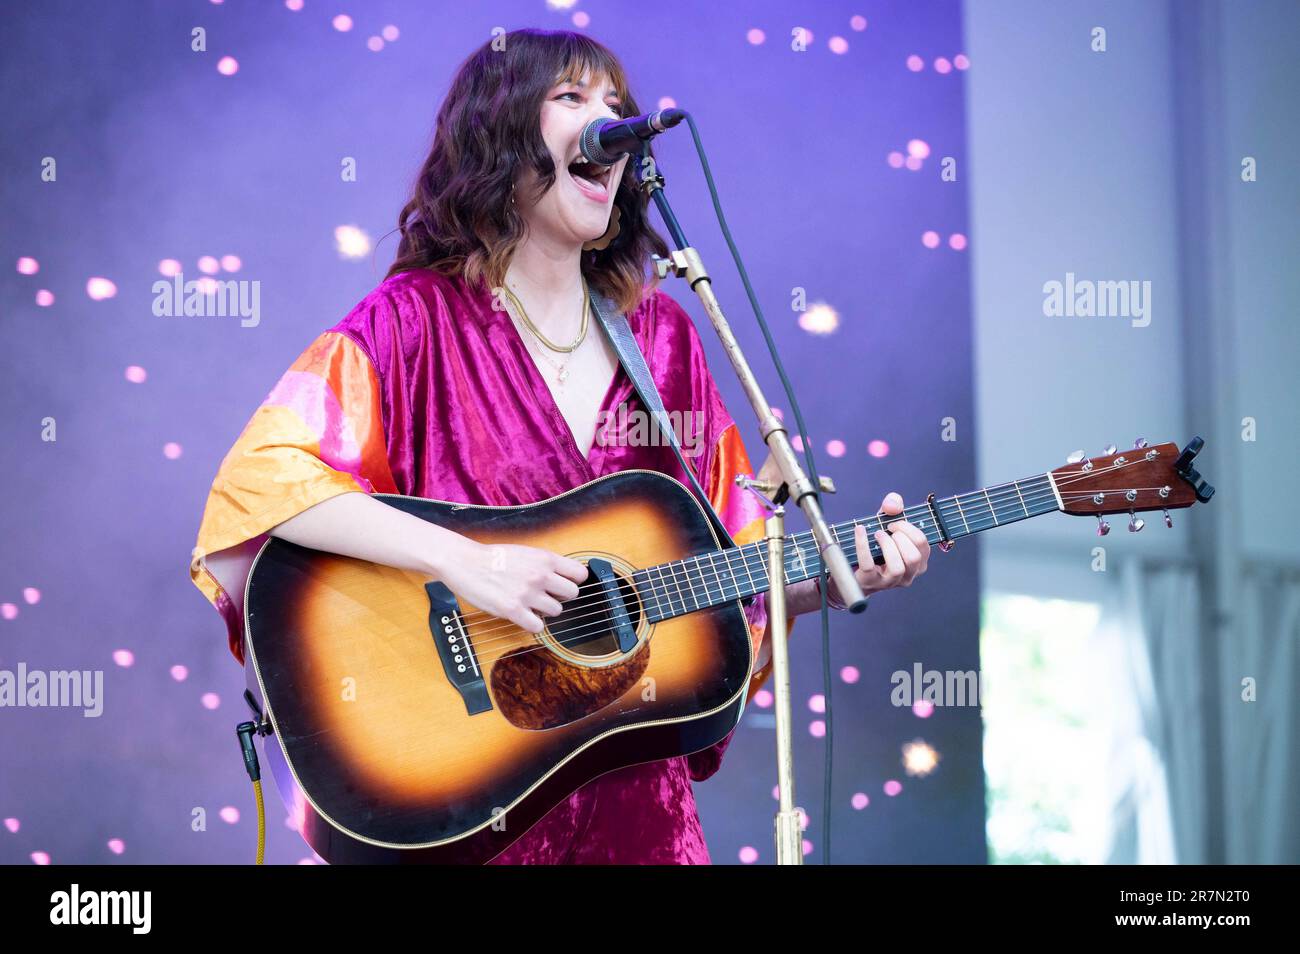 Manchester, United States. 19th June, 2022. Molly Tuttle and Golden Highway perform during Day 1 of the 2023 Bonnaroo Music & Arts Festival on June 15, 2023 in Manchester, Tennessee. Photo: Darren Eagles/imageSPACE Credit: Imagespace/Alamy Live News Stock Photo